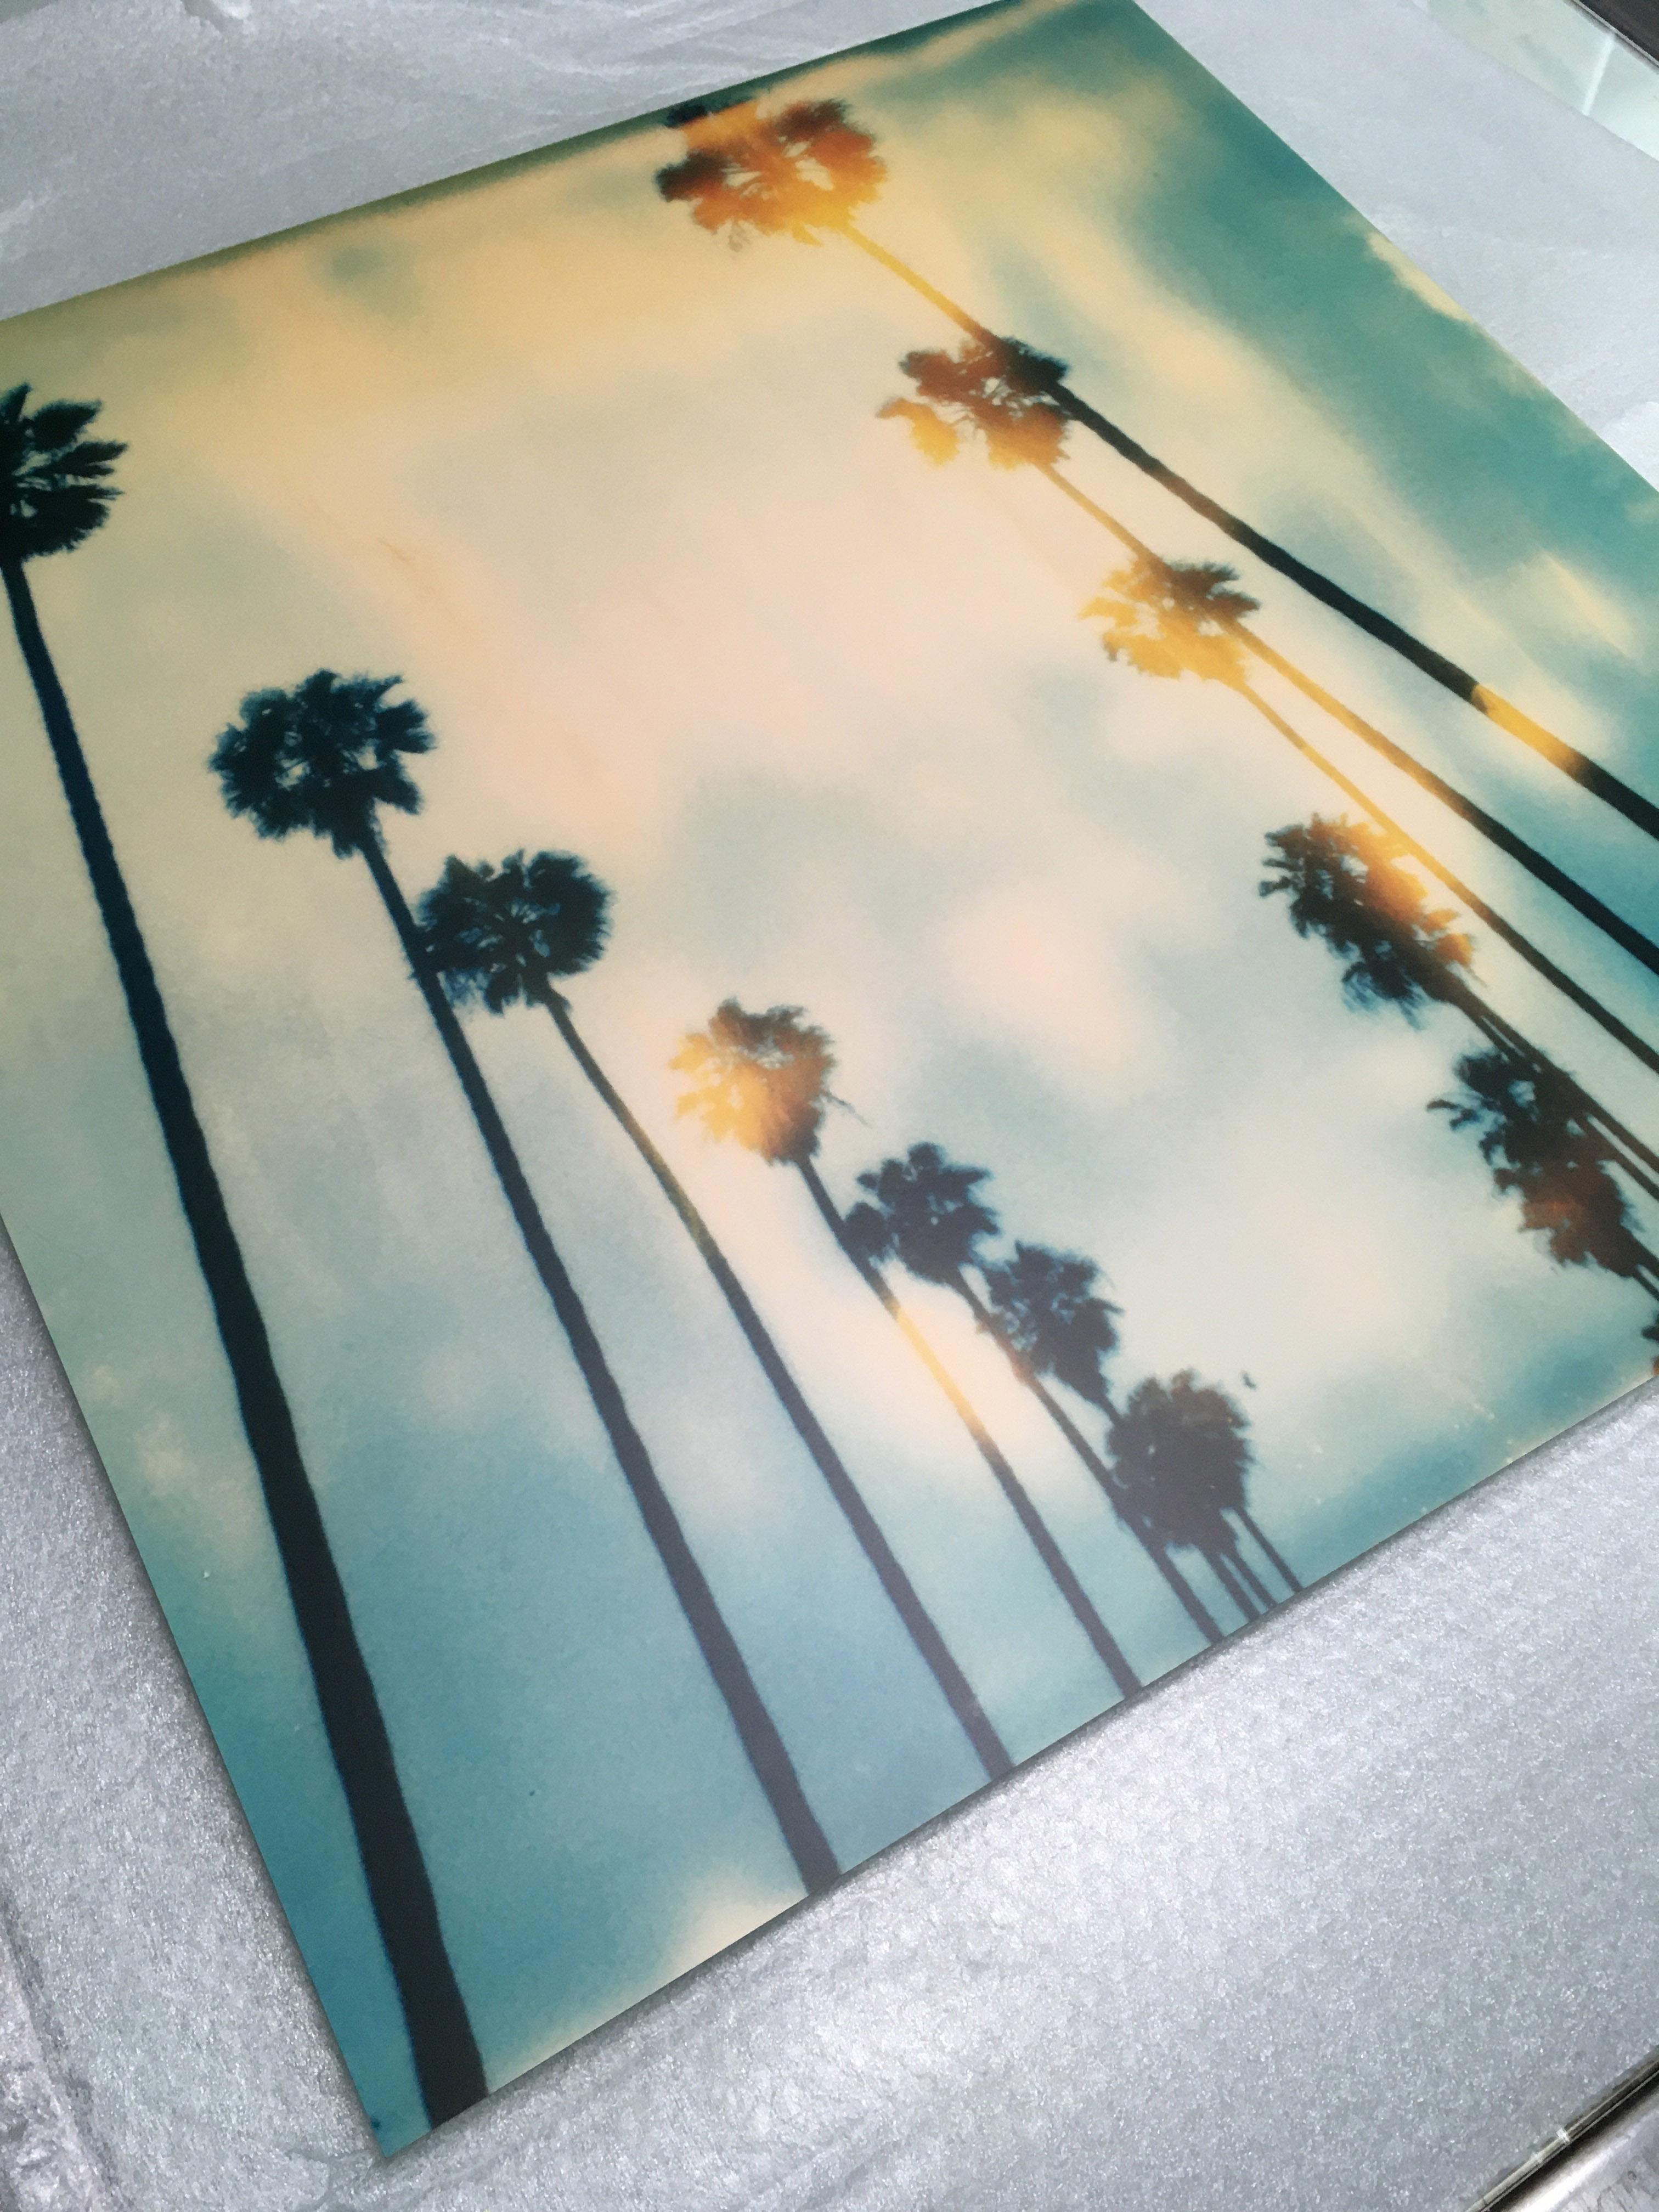 Palm Trees on Wilcox (Stranger than Paradise) 1999, 

80x78cm,  Edition 17/100, digital C-Print based on an original Polaroid, 
mounted on Dibond with matte UV-Protection.
Certificate and signature label, artist inventory number: 398. 
Signature